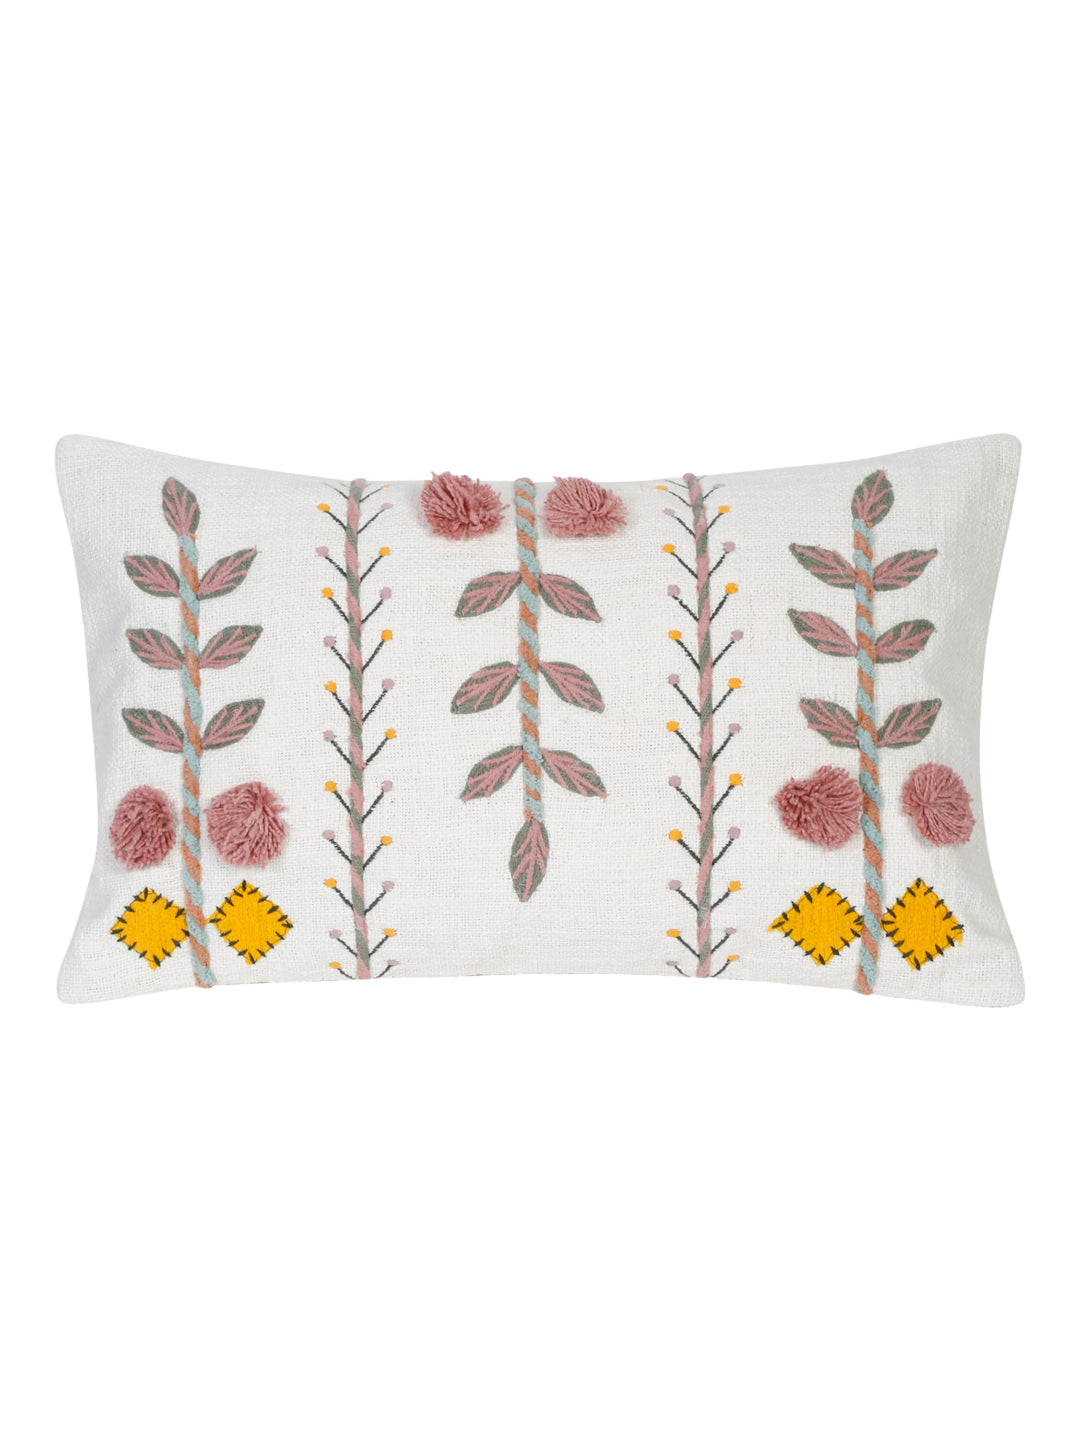 Set of 2 White & Pink Cotton Embroidered Square Cushion Covers